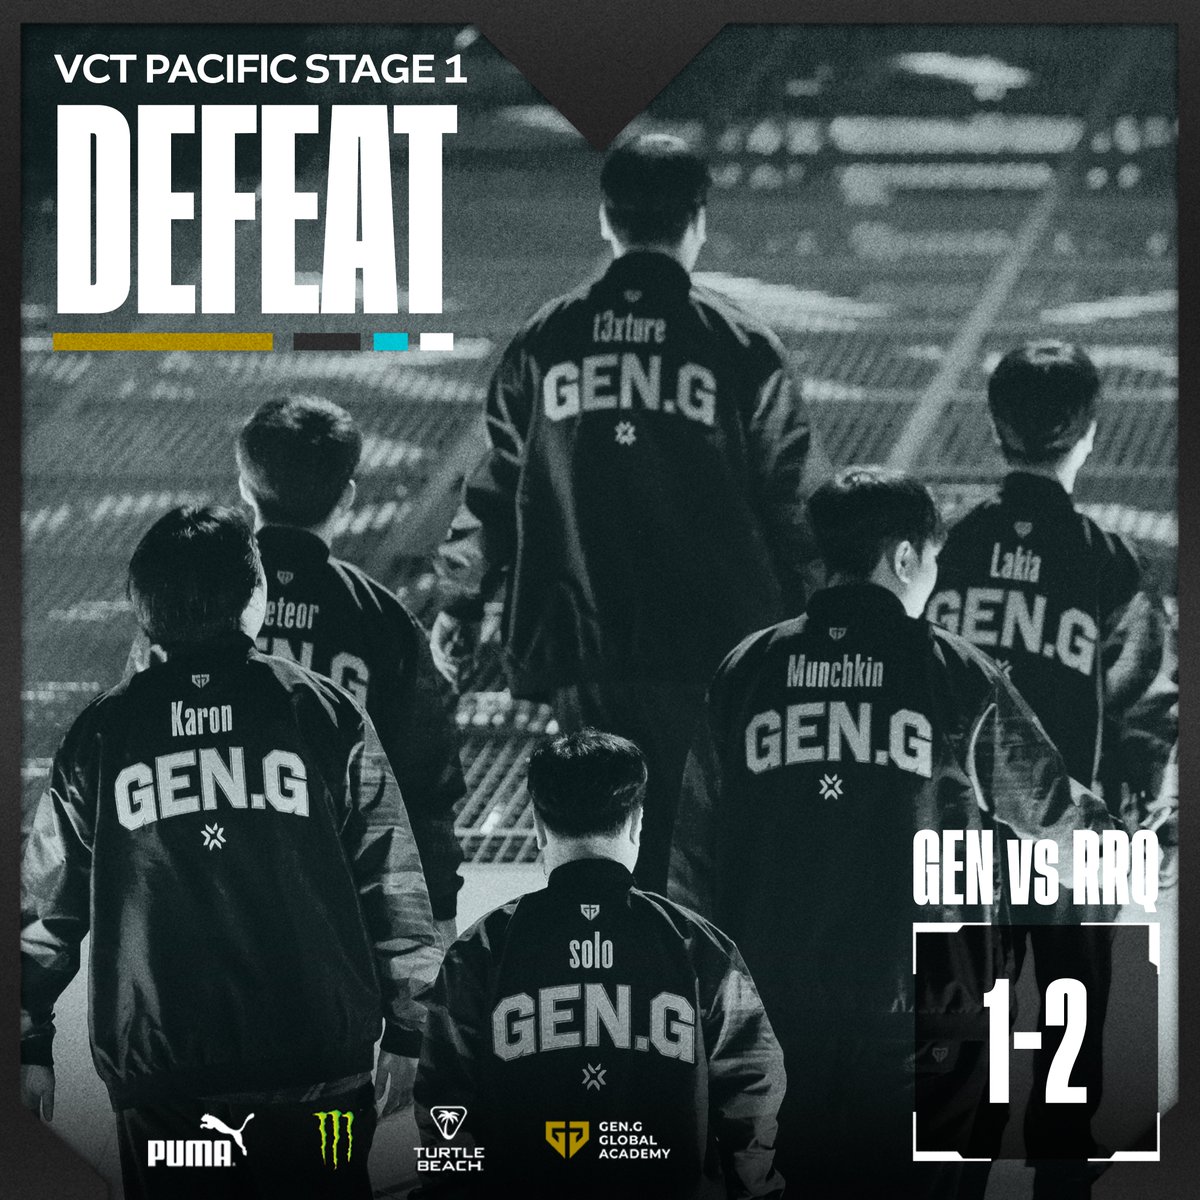 📍 #𝐕𝐂𝐓𝐏𝐚𝐜𝐢𝐟𝐢𝐜 𝐒𝐓𝐀𝐆𝐄 𝟏 𝐯𝐬 @teamrrqofficial

Not our best, but we'll work hard to shape up for playoffs.
오늘의 패배를 발판 삼아 플레이오프 준비 제대로 해오겠습니다.

#TIGERNATION #GENGVAL